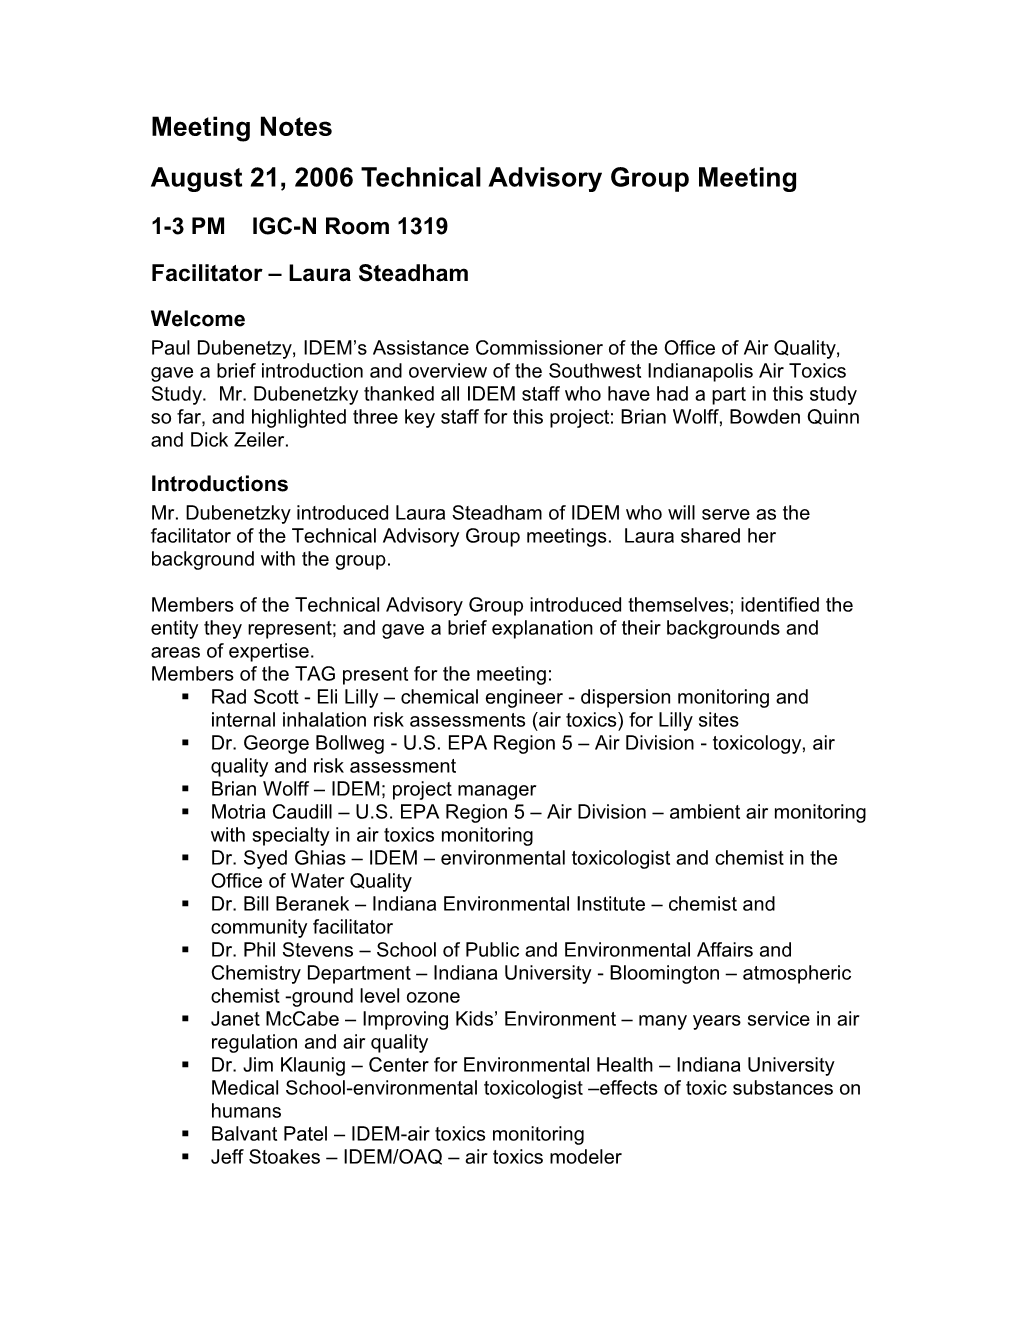 August 21, 2006 Technical Advisory Group Meeting